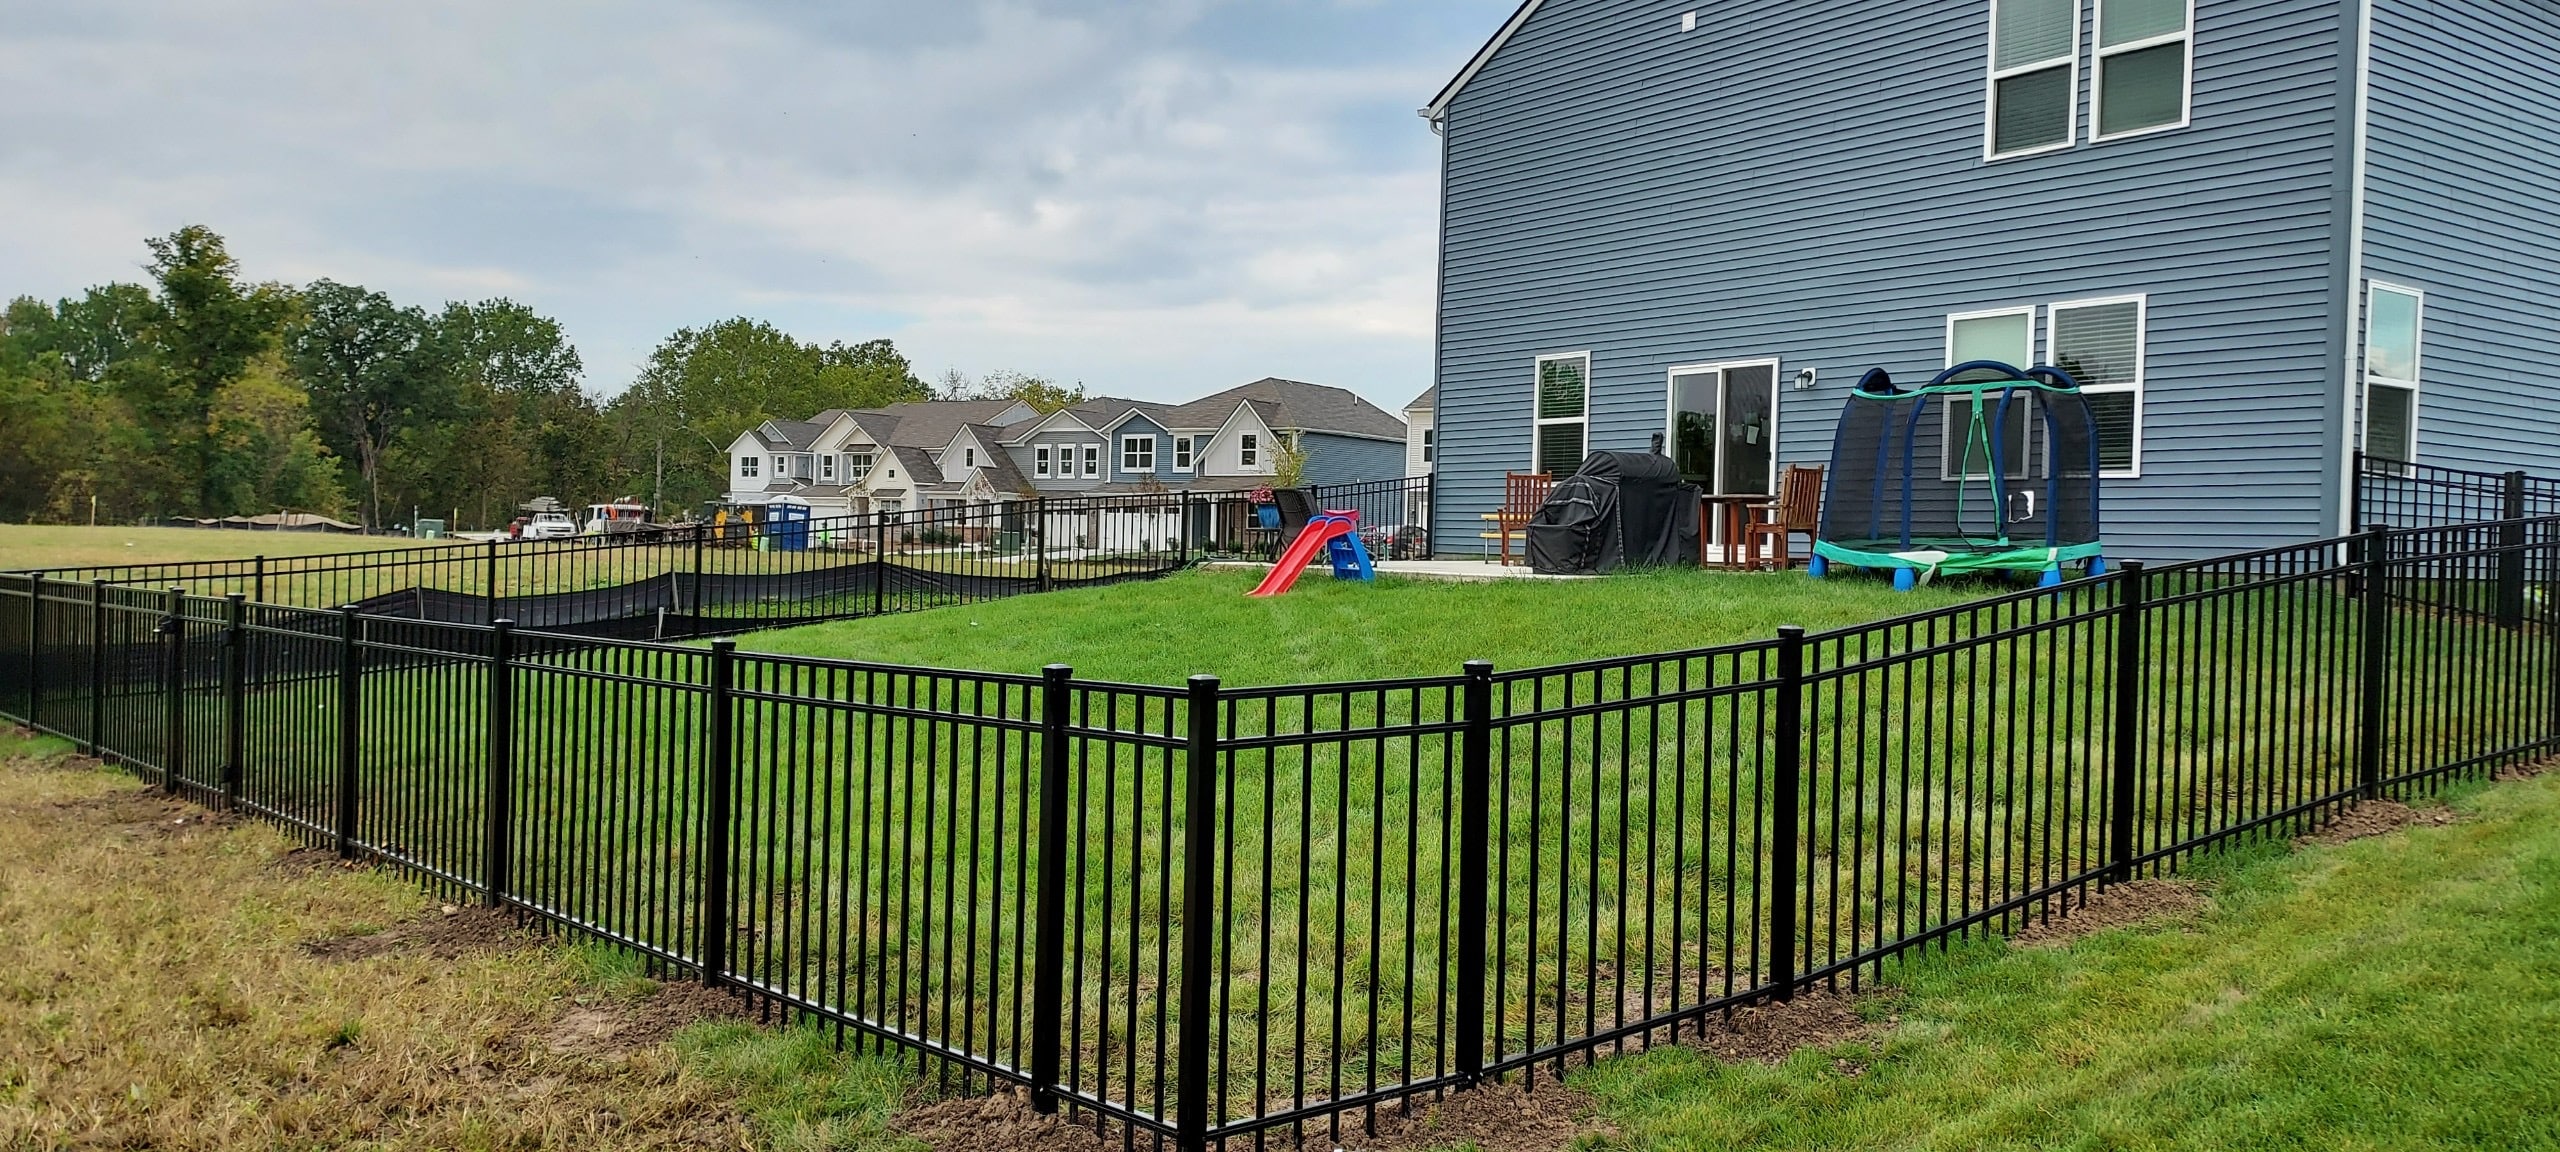 Shadow-Box Fence Installation in Indianapolis